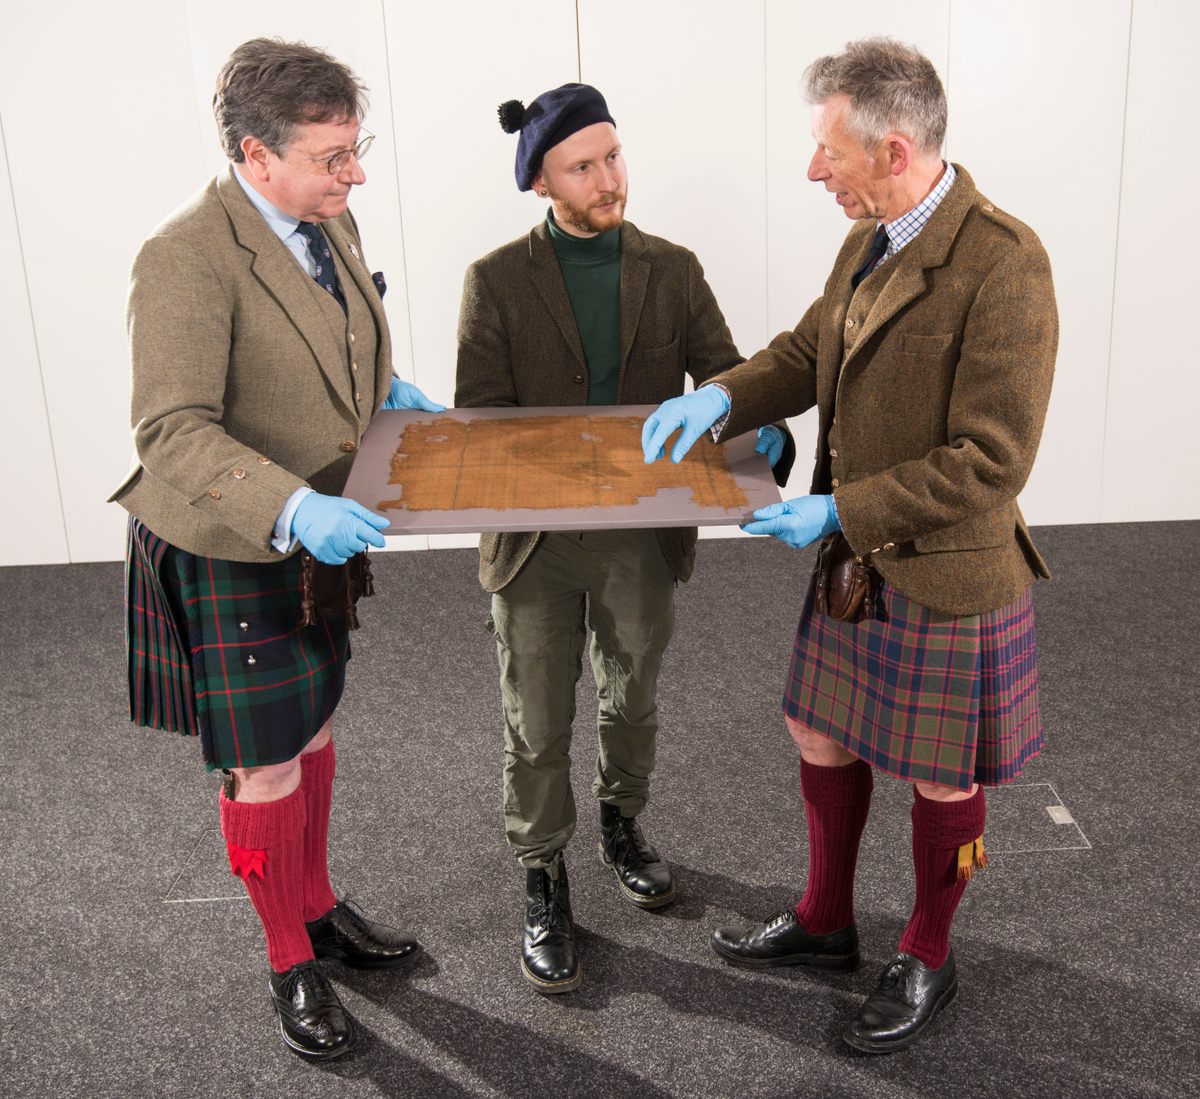 Today, tartans are widely associated with kilts. 